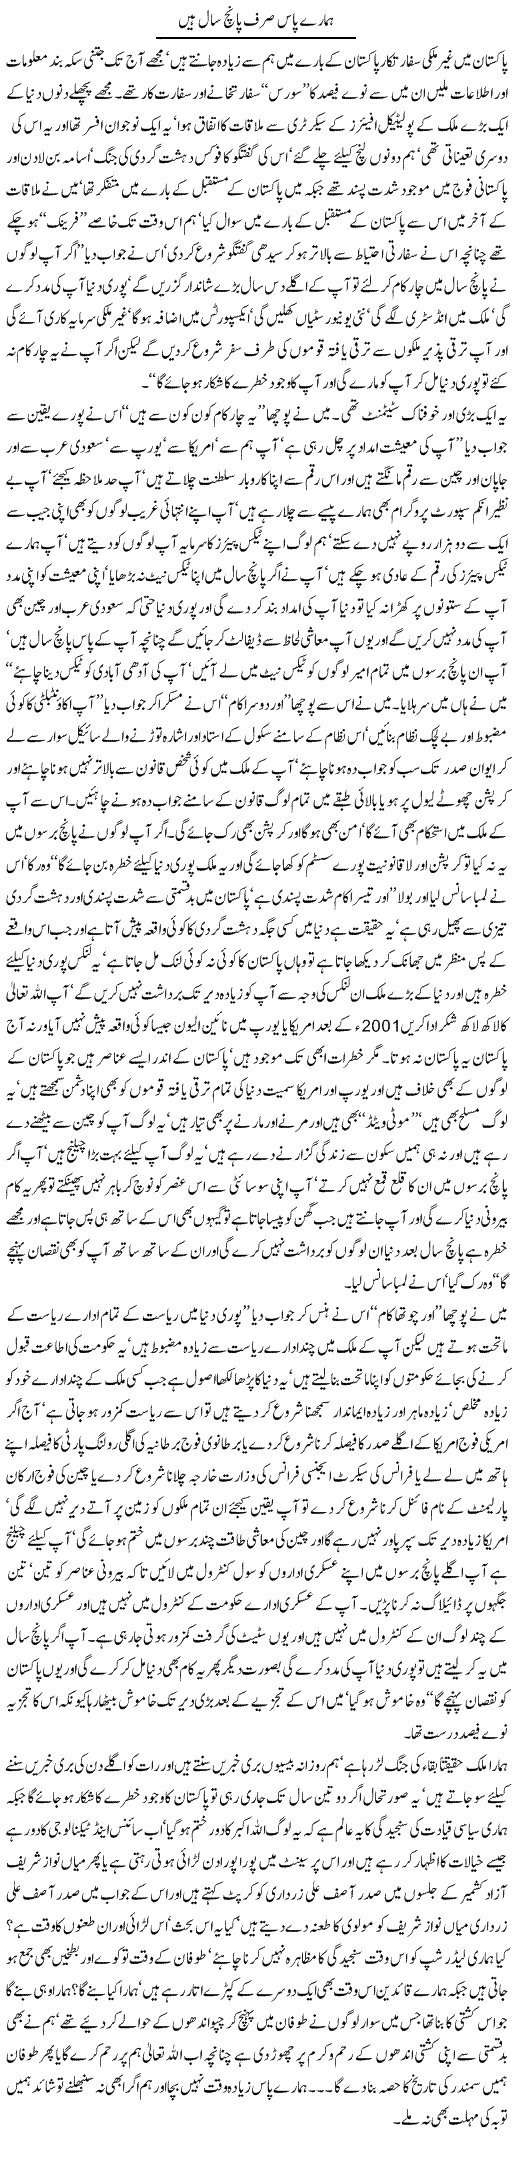 Pakistan Have 5 Years Express Column Javed Chaudhry 24 June 2011